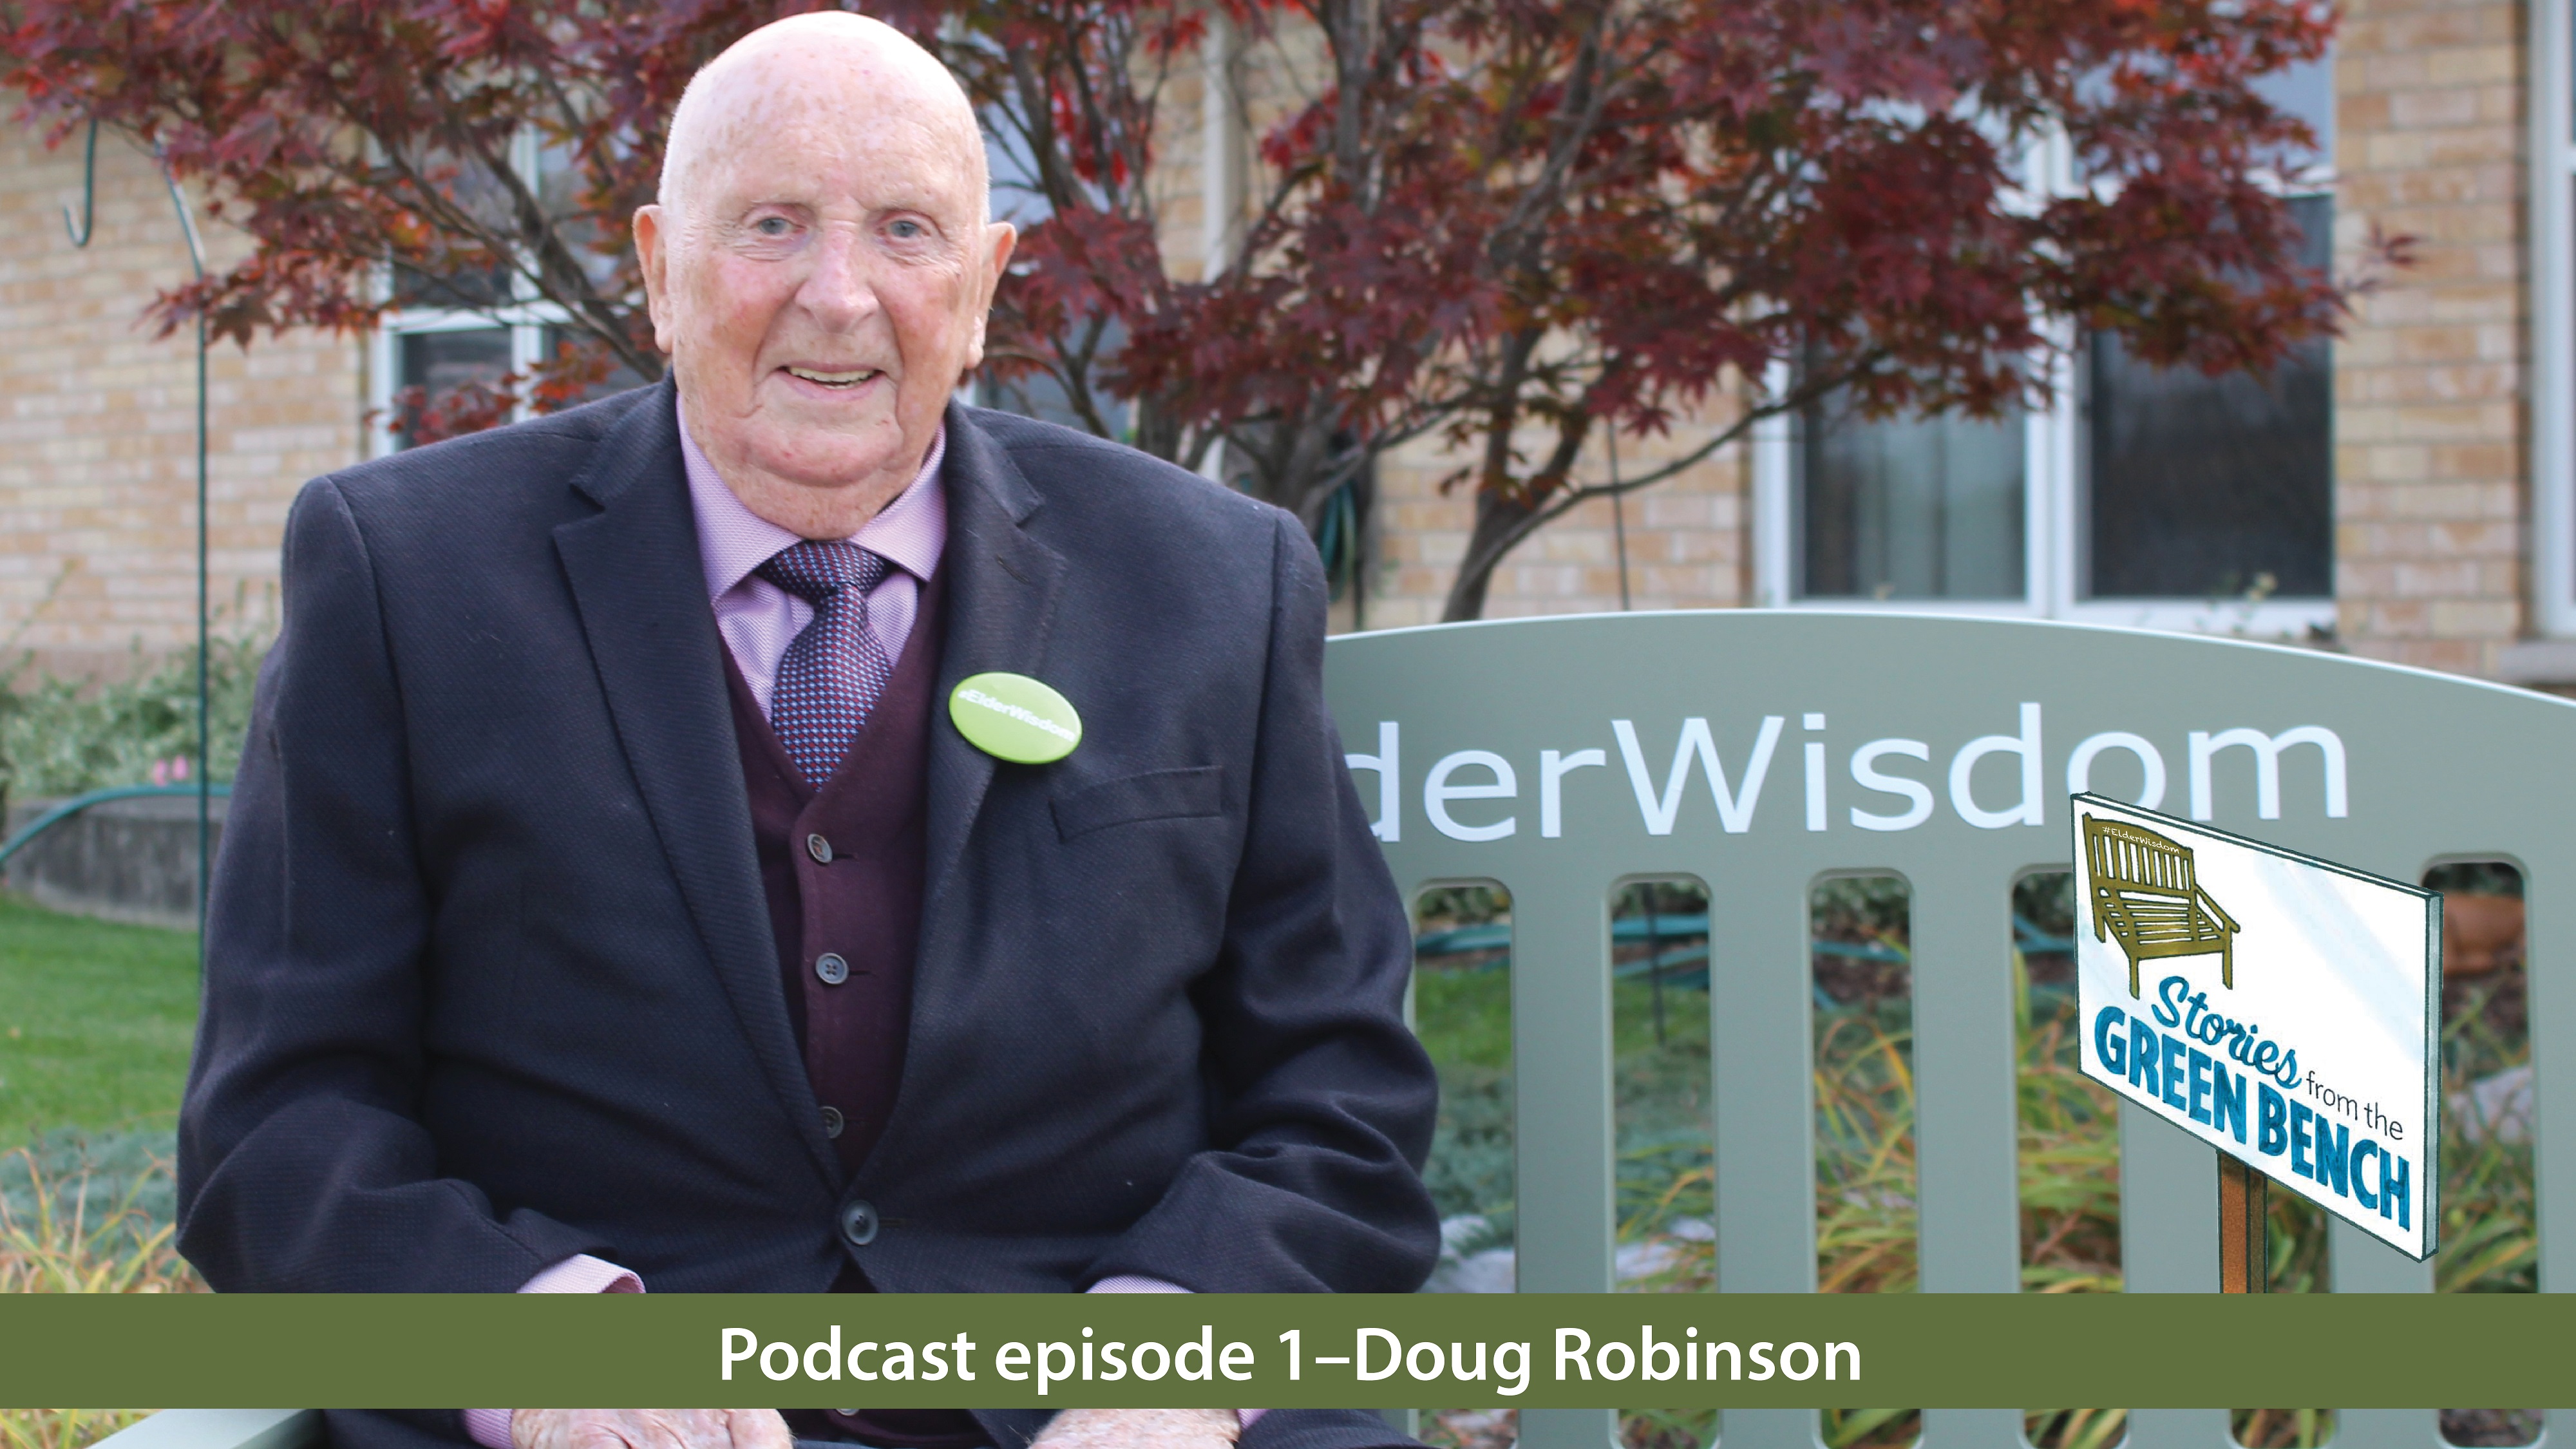 Doug Robinson sitting on the green bench promoting episode number 1 of the #ElderWisdom | Stories from the Green Bench podcast